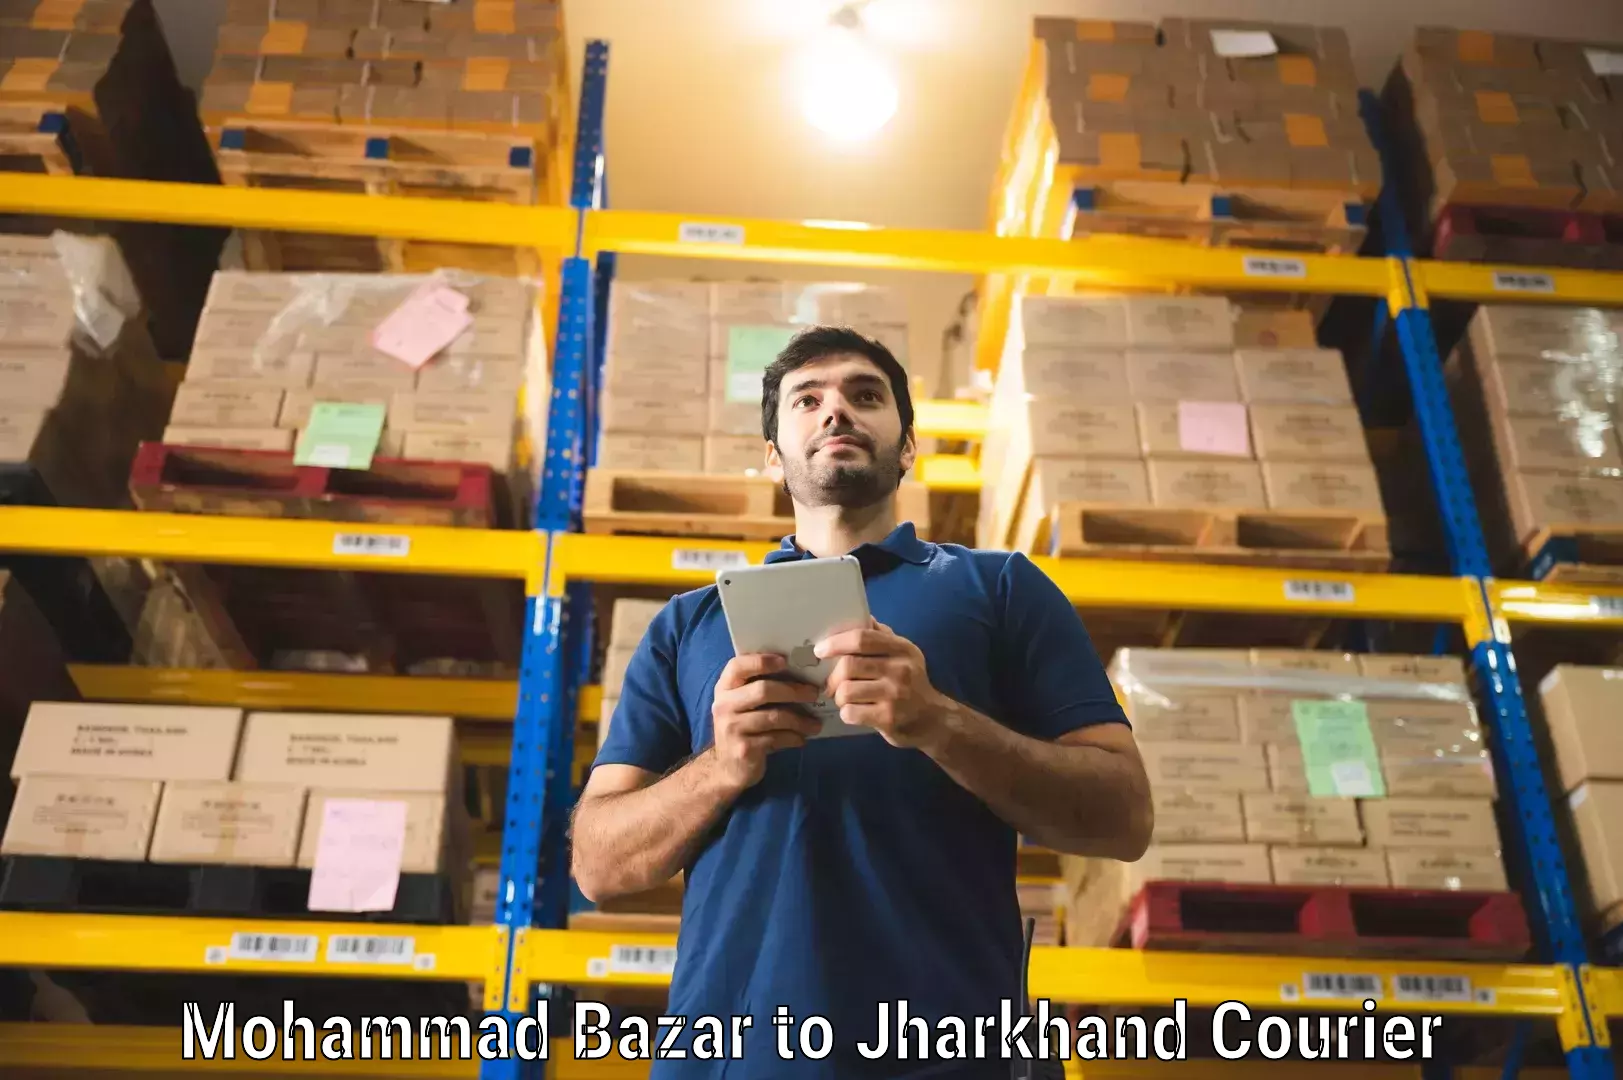 Courier service partnerships Mohammad Bazar to Jharkhand